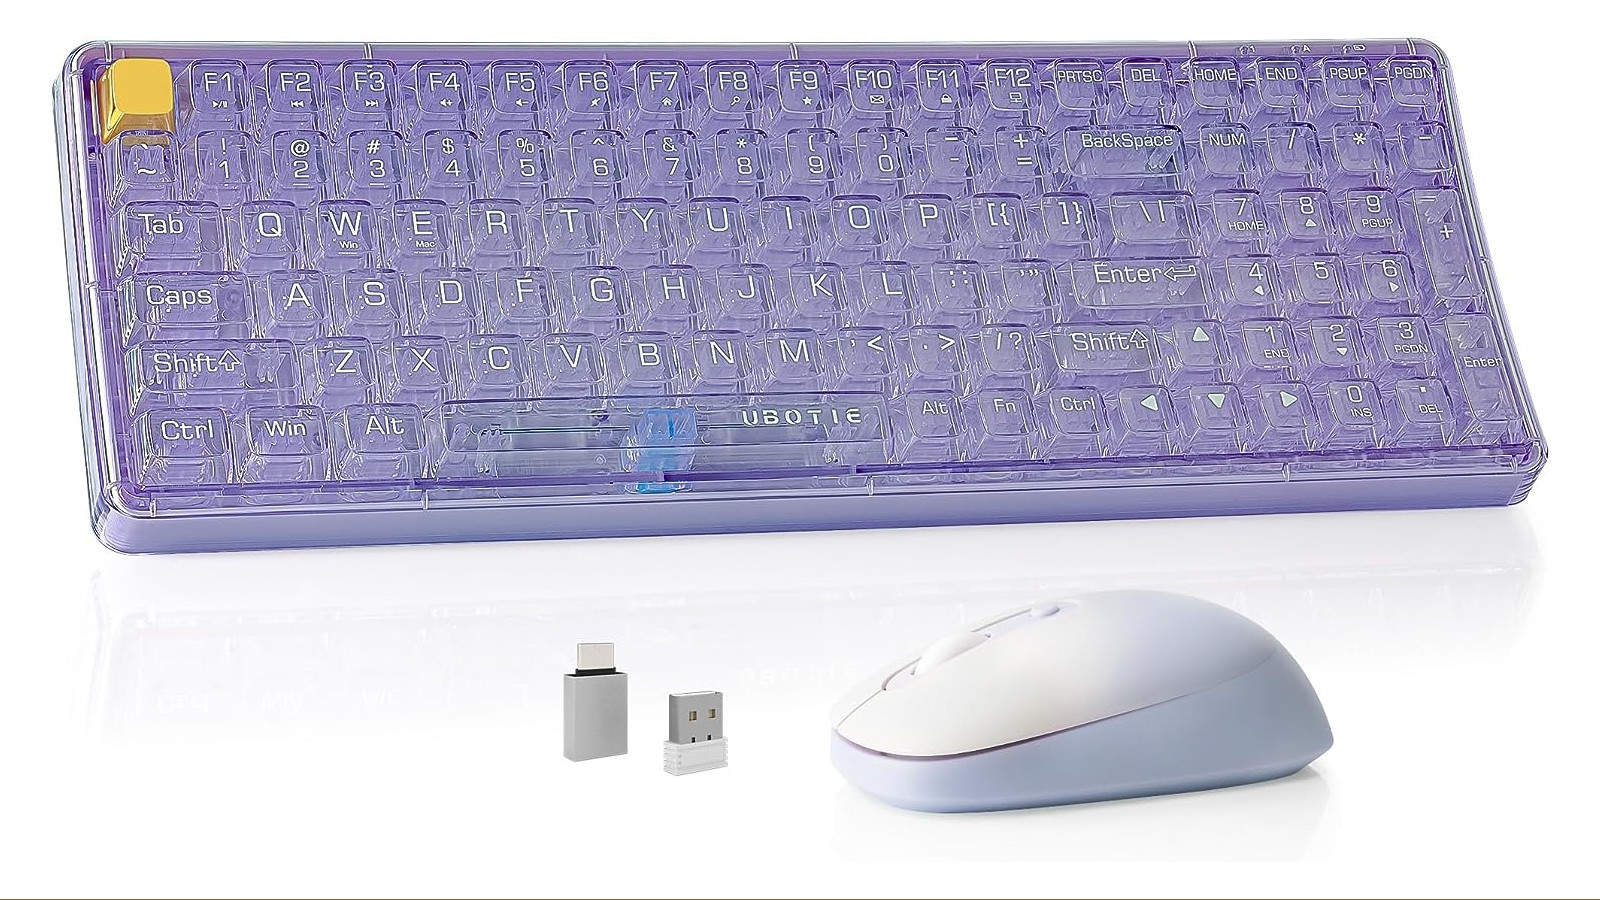 UBOTIE Wireless Transparent Keyboard and Mouse